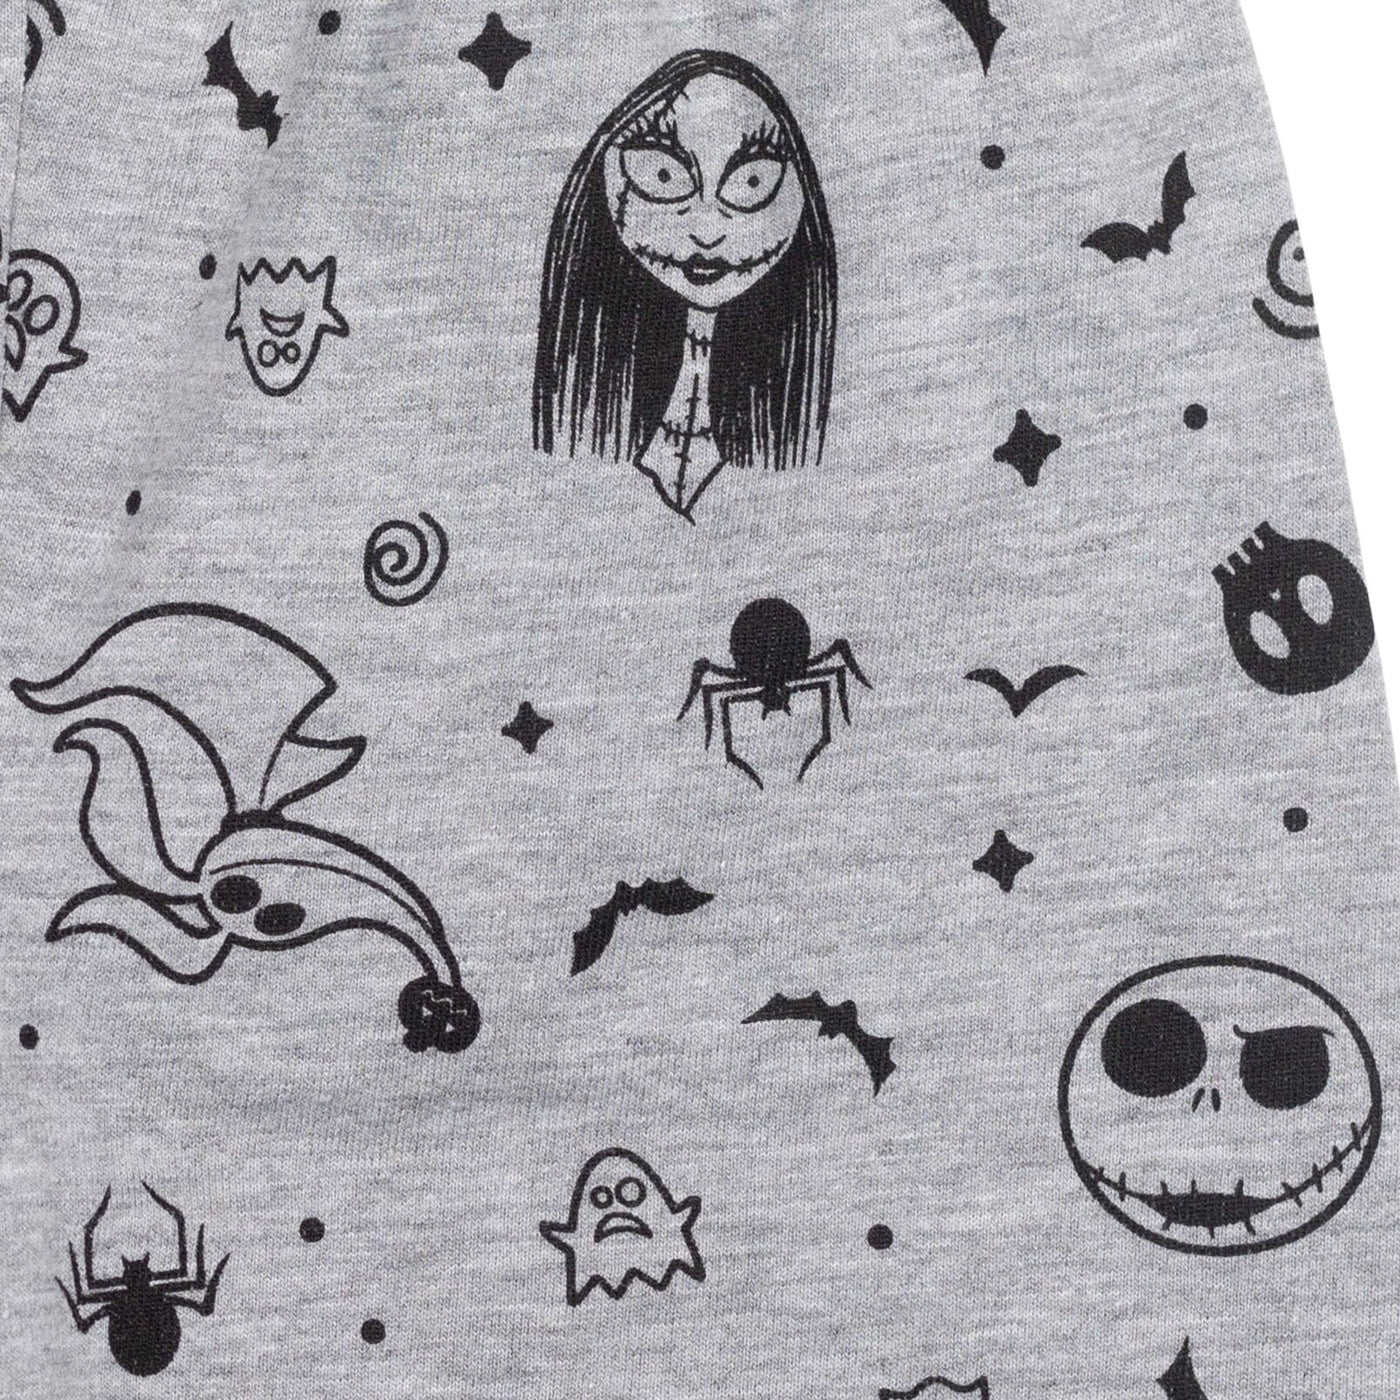 Nightmare Before Christmas Jack Skellington T-Shirt and Shorts Outfit Set